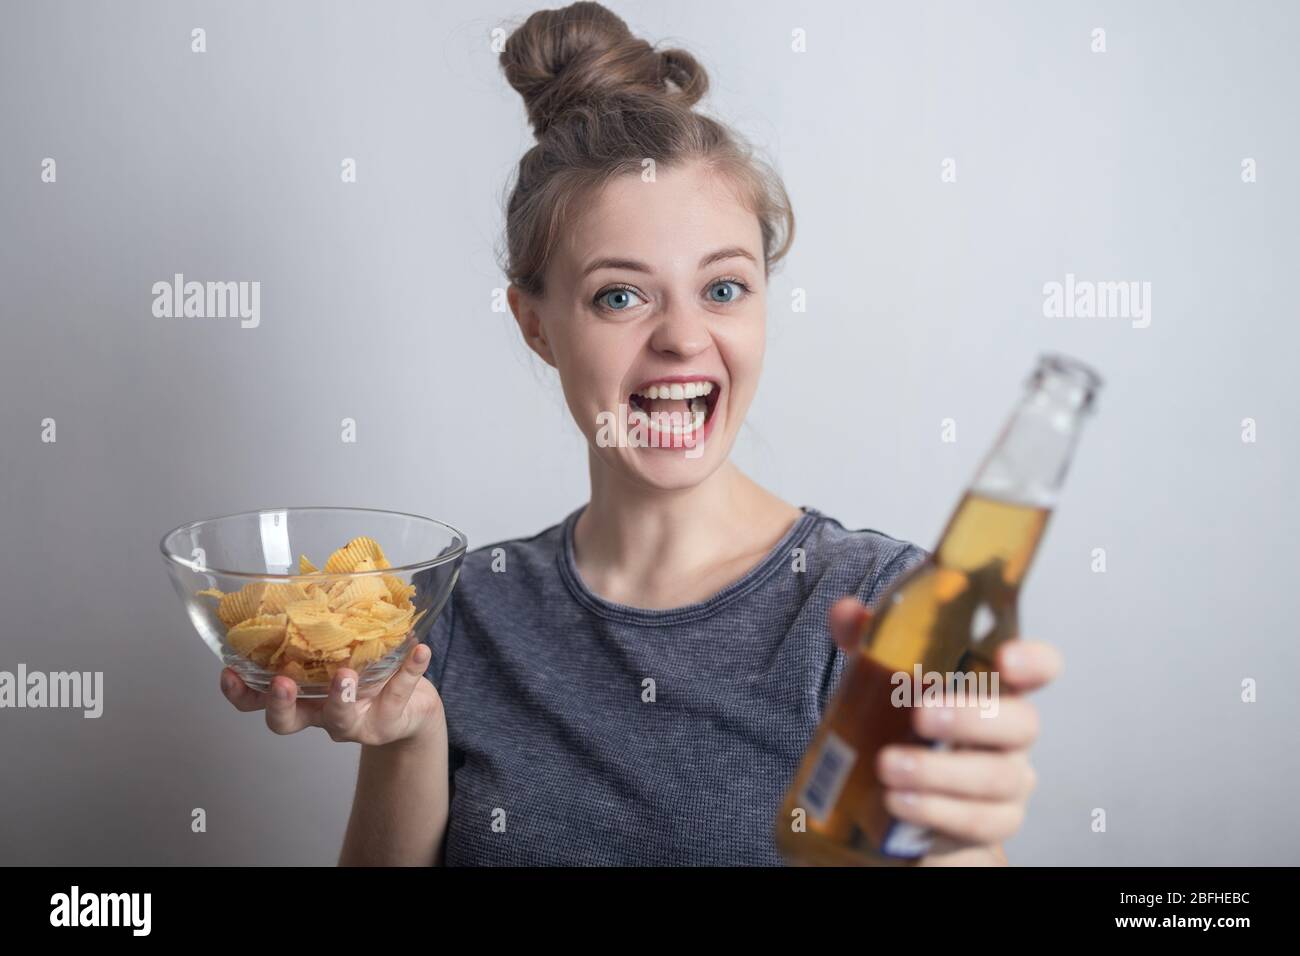 Smiling young caucasian woman girl drinking bottle of beer and holding potato chips crisps Stock Photo